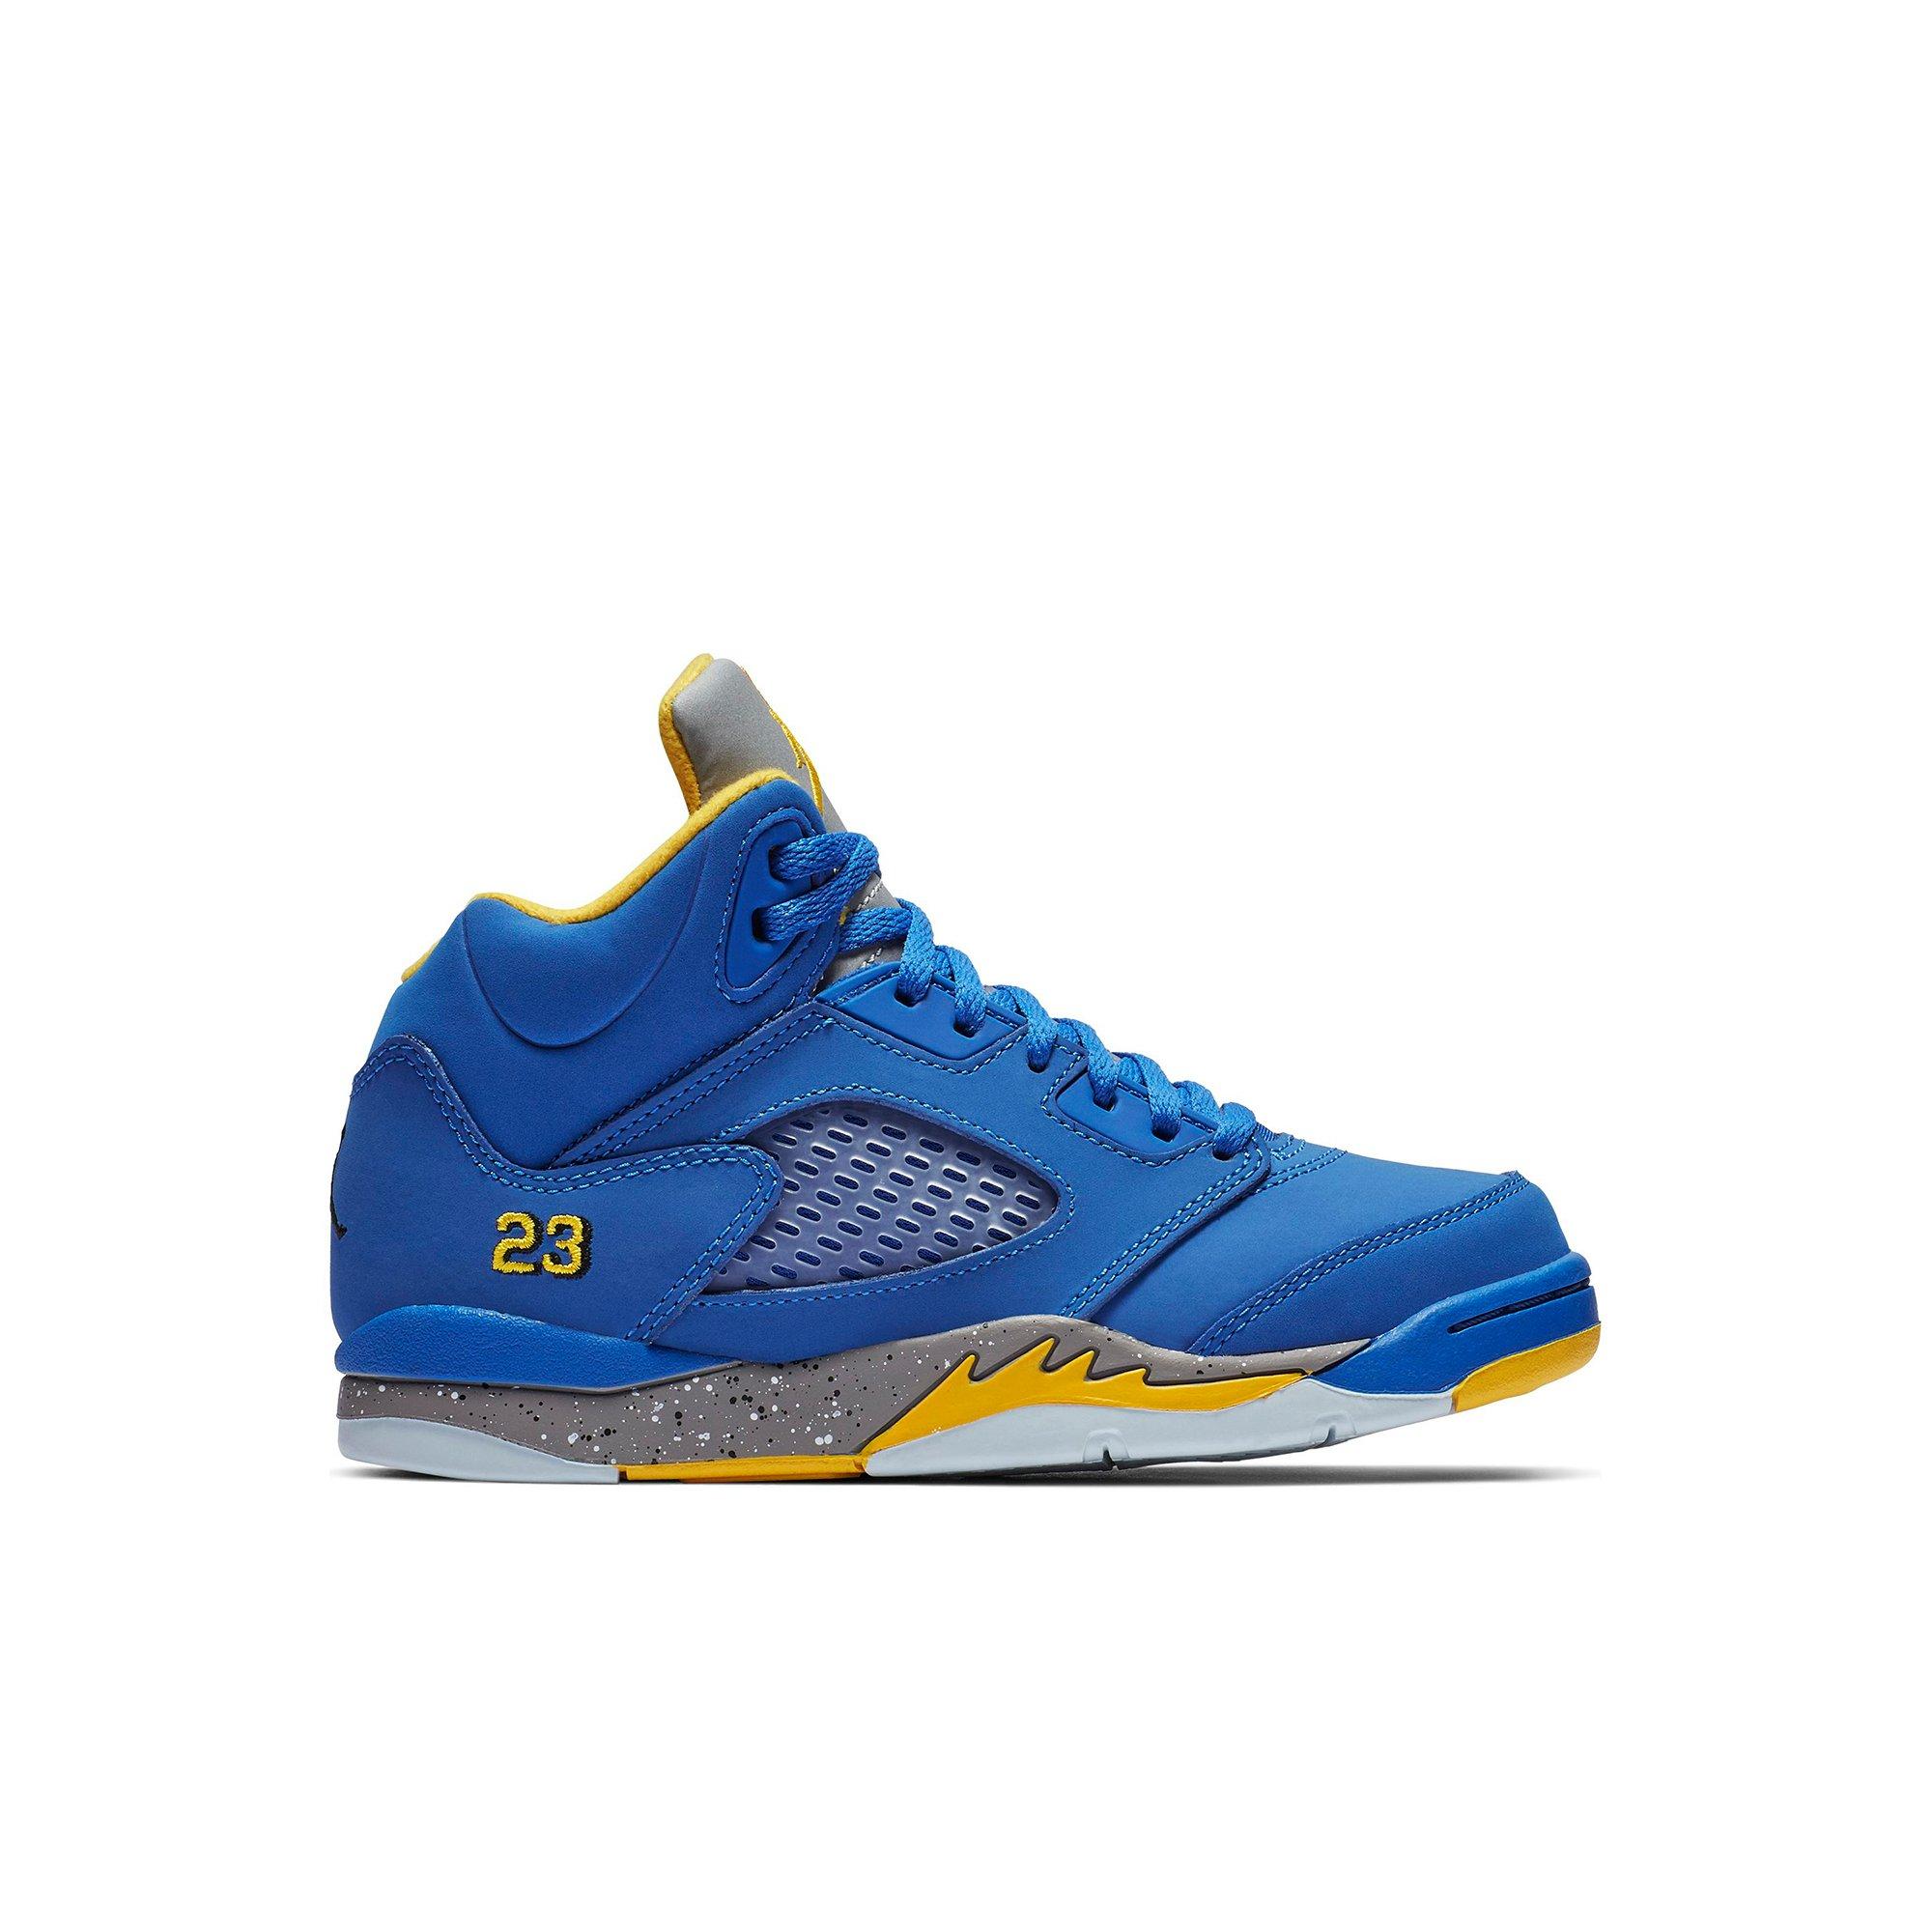 blue and yellow 5s outfit